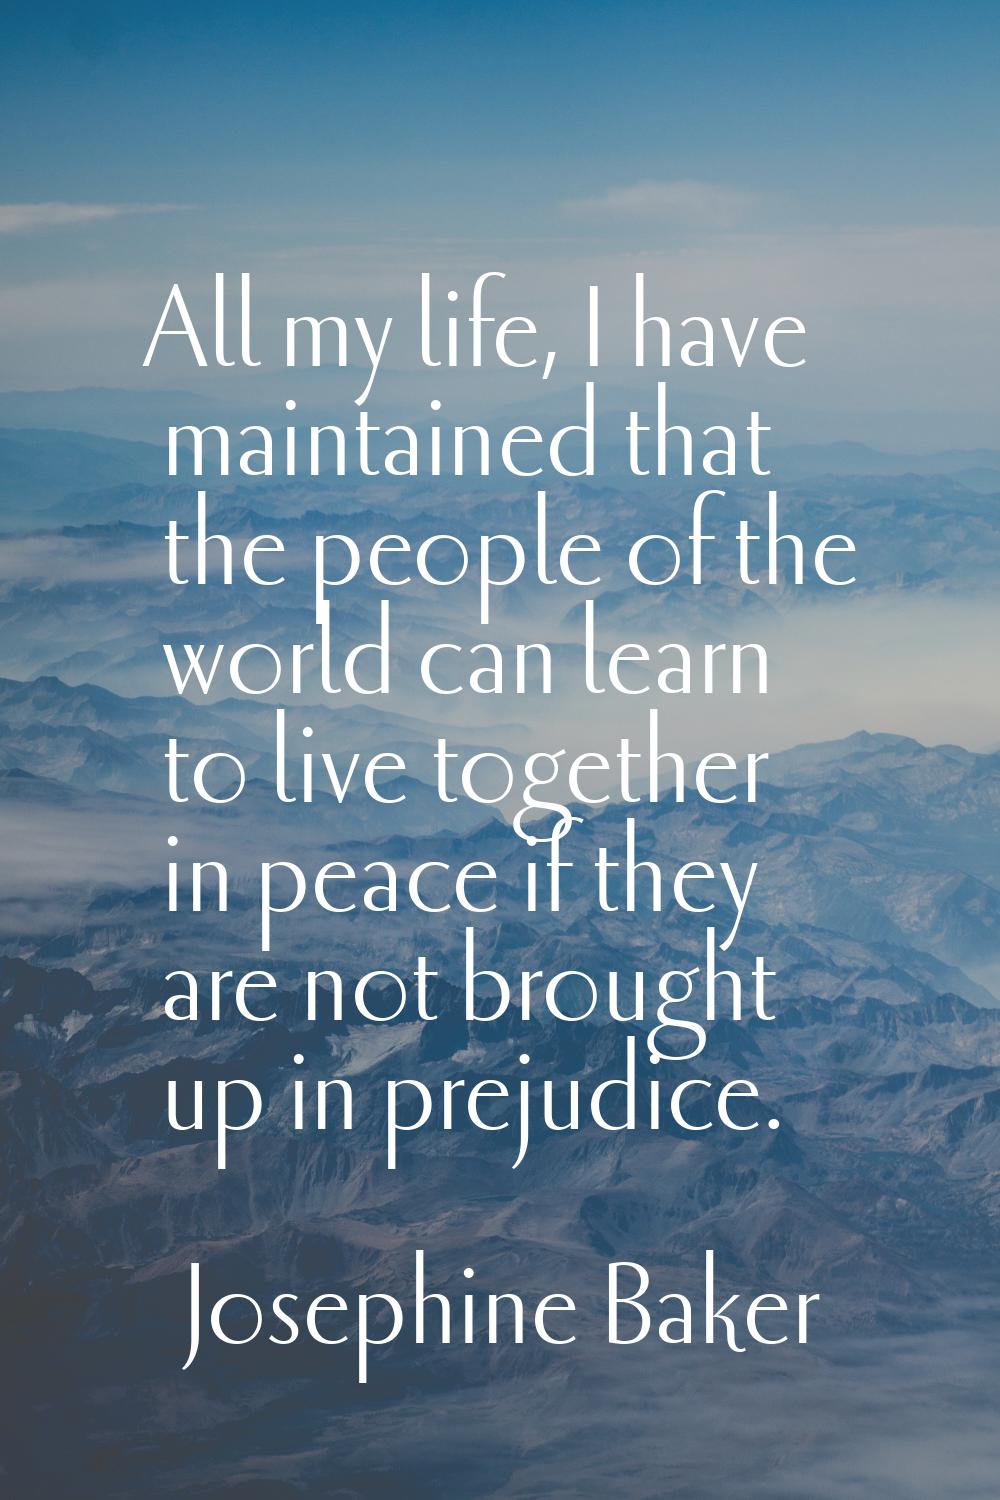 All my life, I have maintained that the people of the world can learn to live together in peace if 